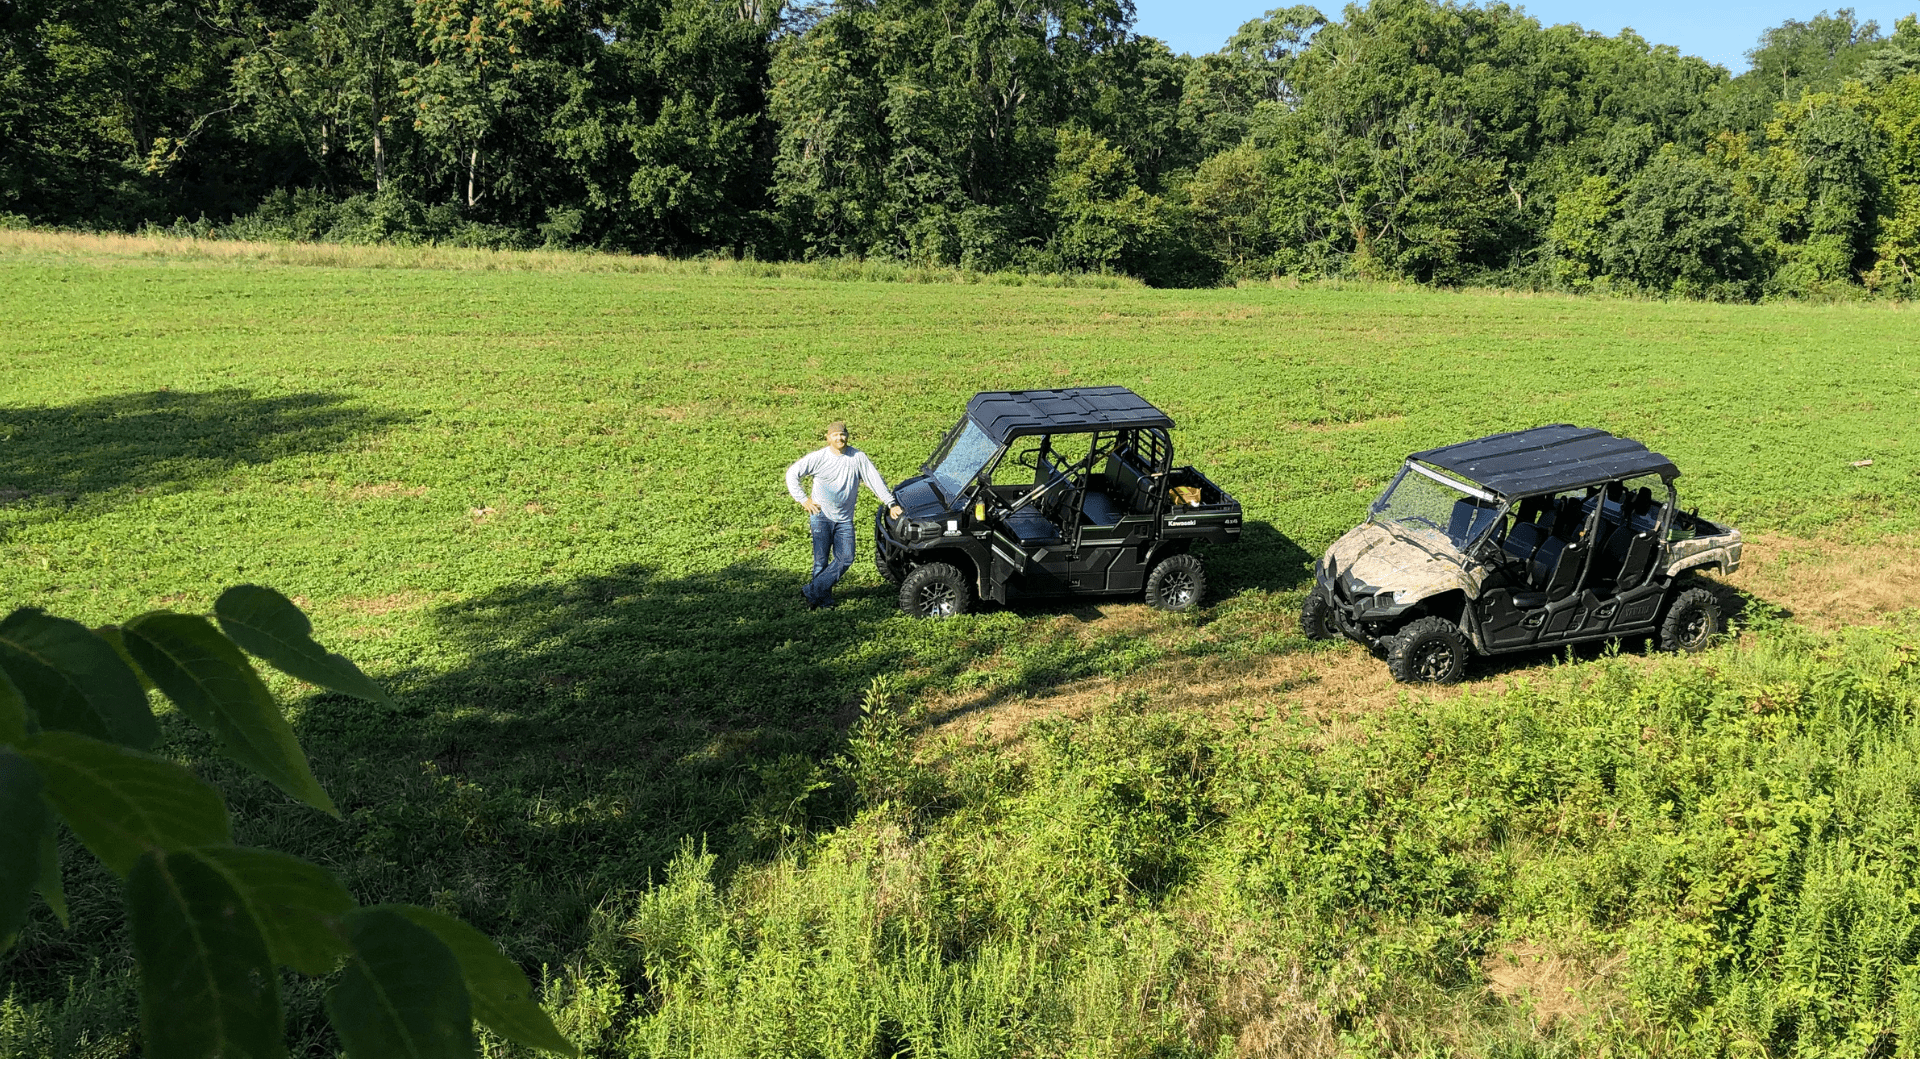 Off-roading friendly community - around the neighborhood at Rivers Pointe Estates in Hebron, Kentucky